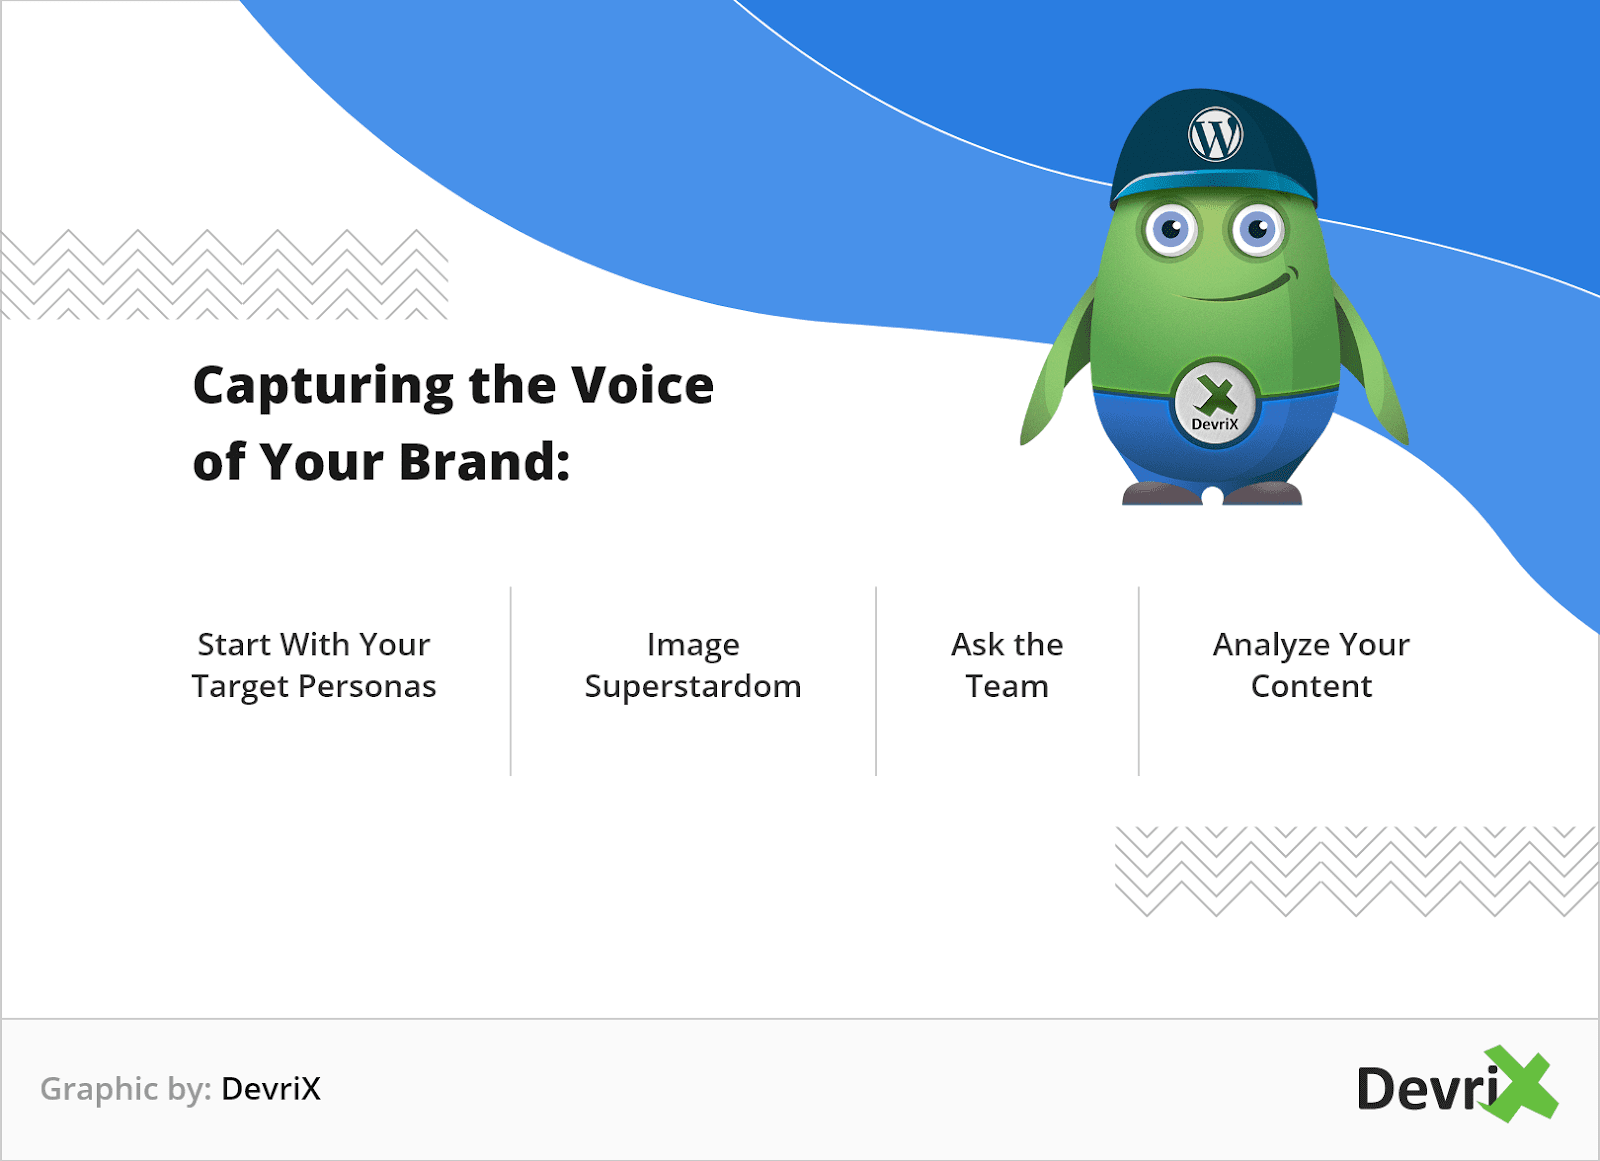 Capturing the Voice of Your Brand